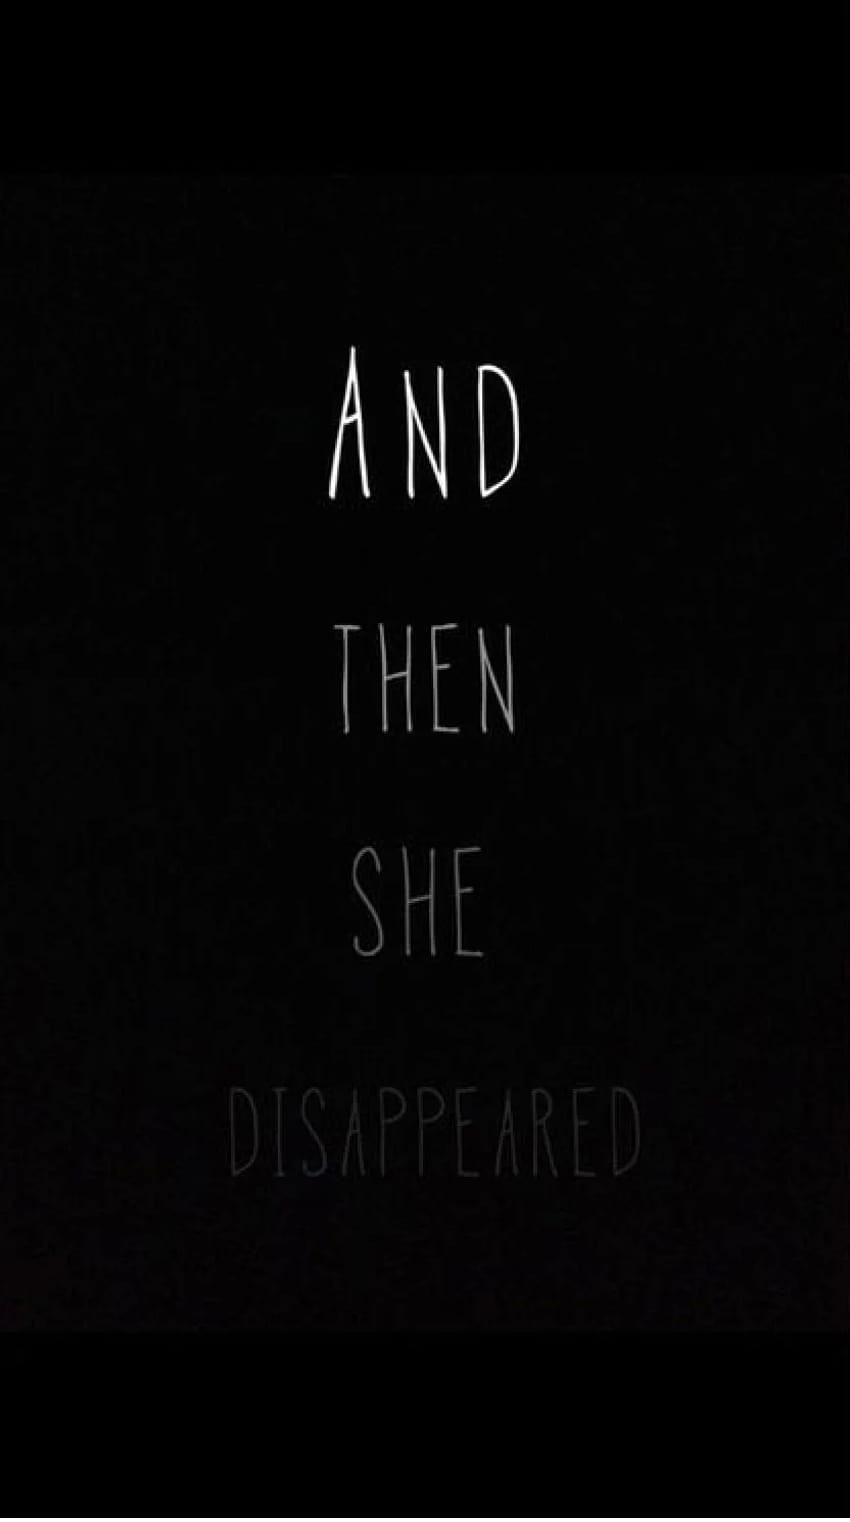 With Broken Heart Quotes posted by Christopher Mercado, heartbroken aesthetic HD phone wallpaper